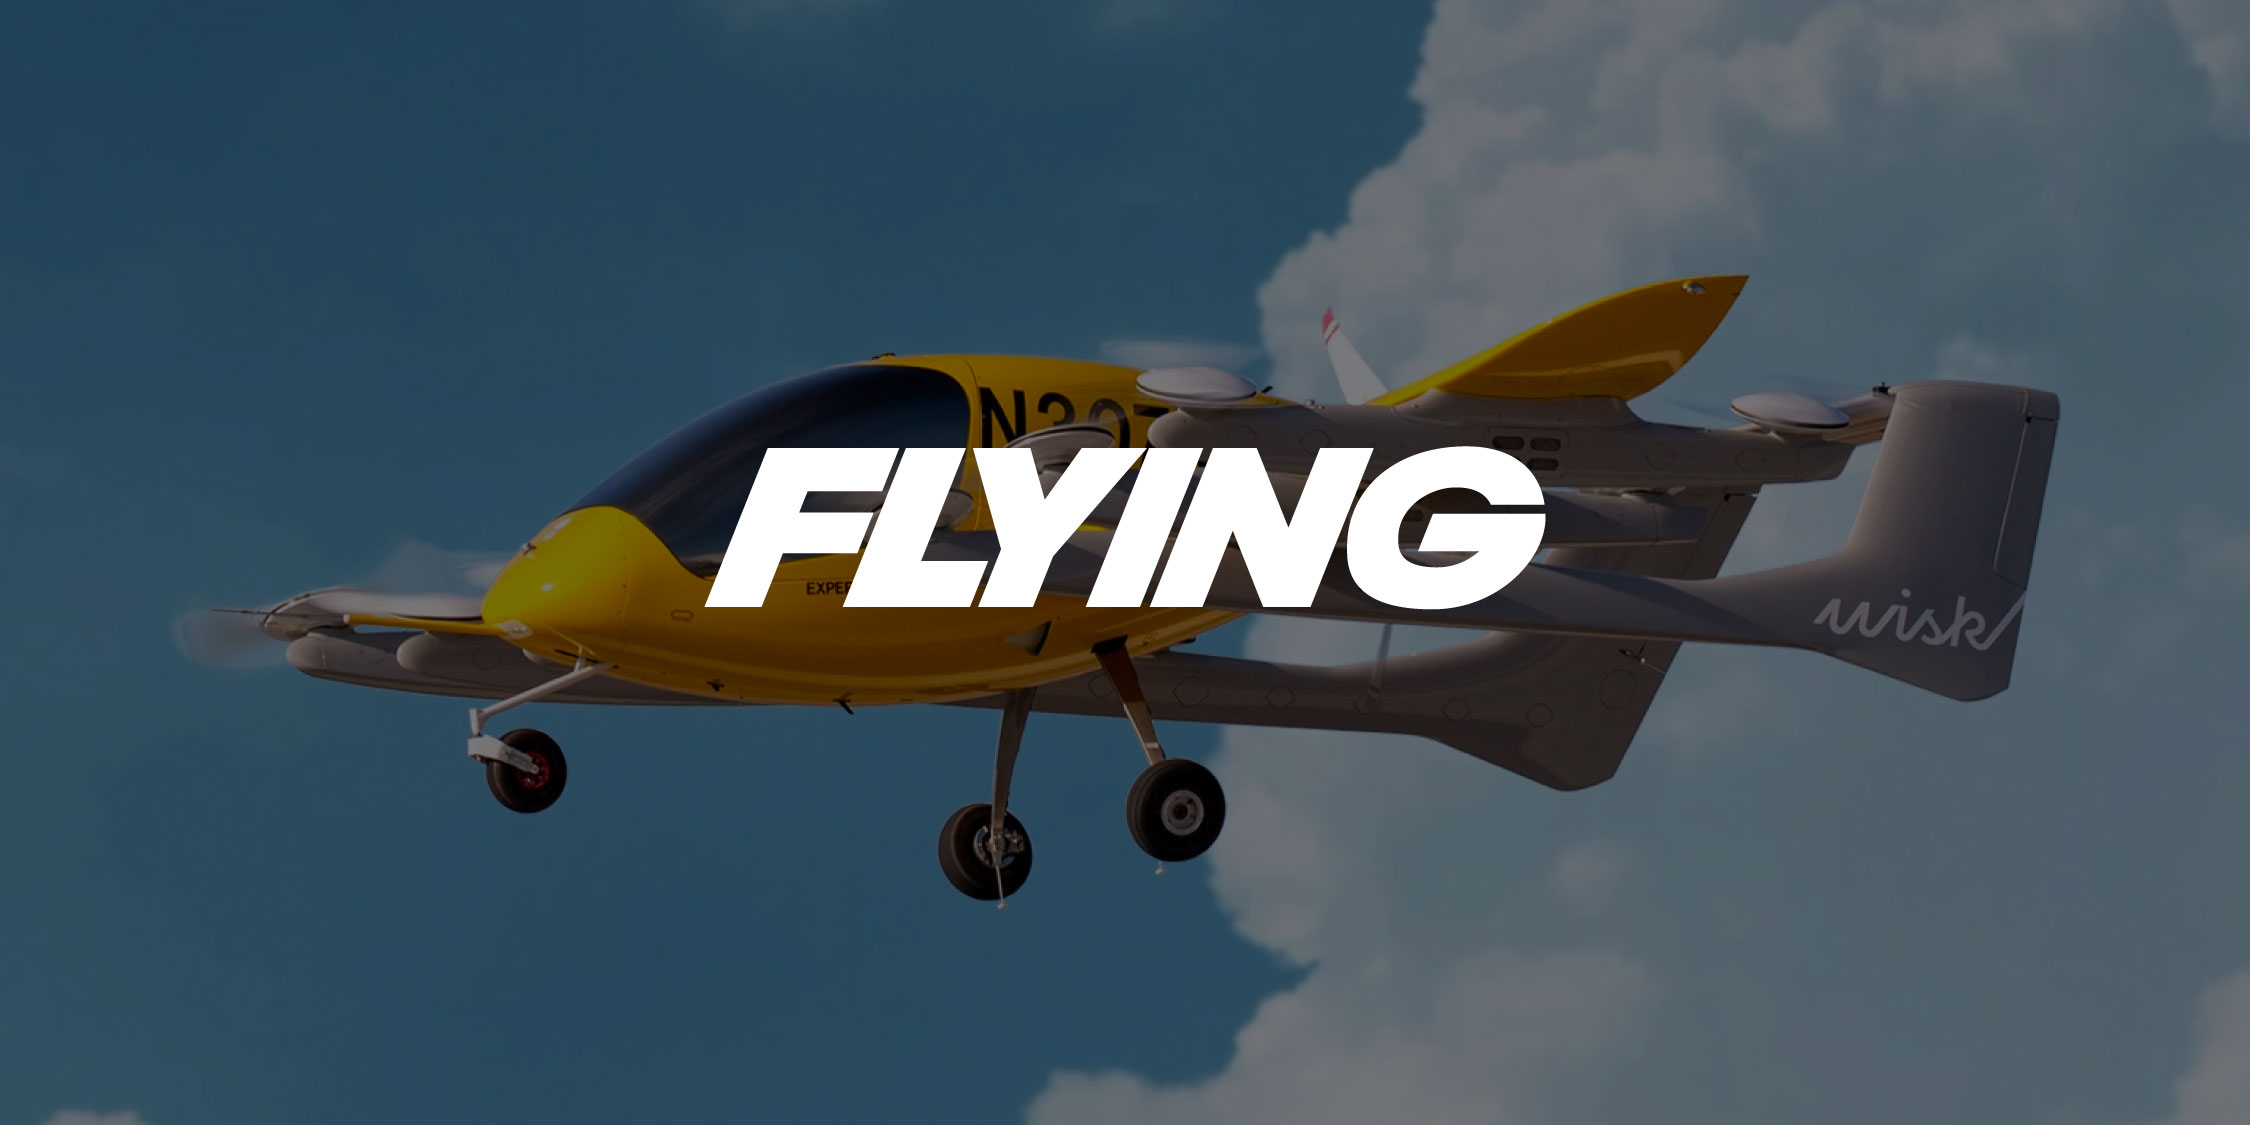 How Will Self-Flying Aircraft Make Ethical Choices?